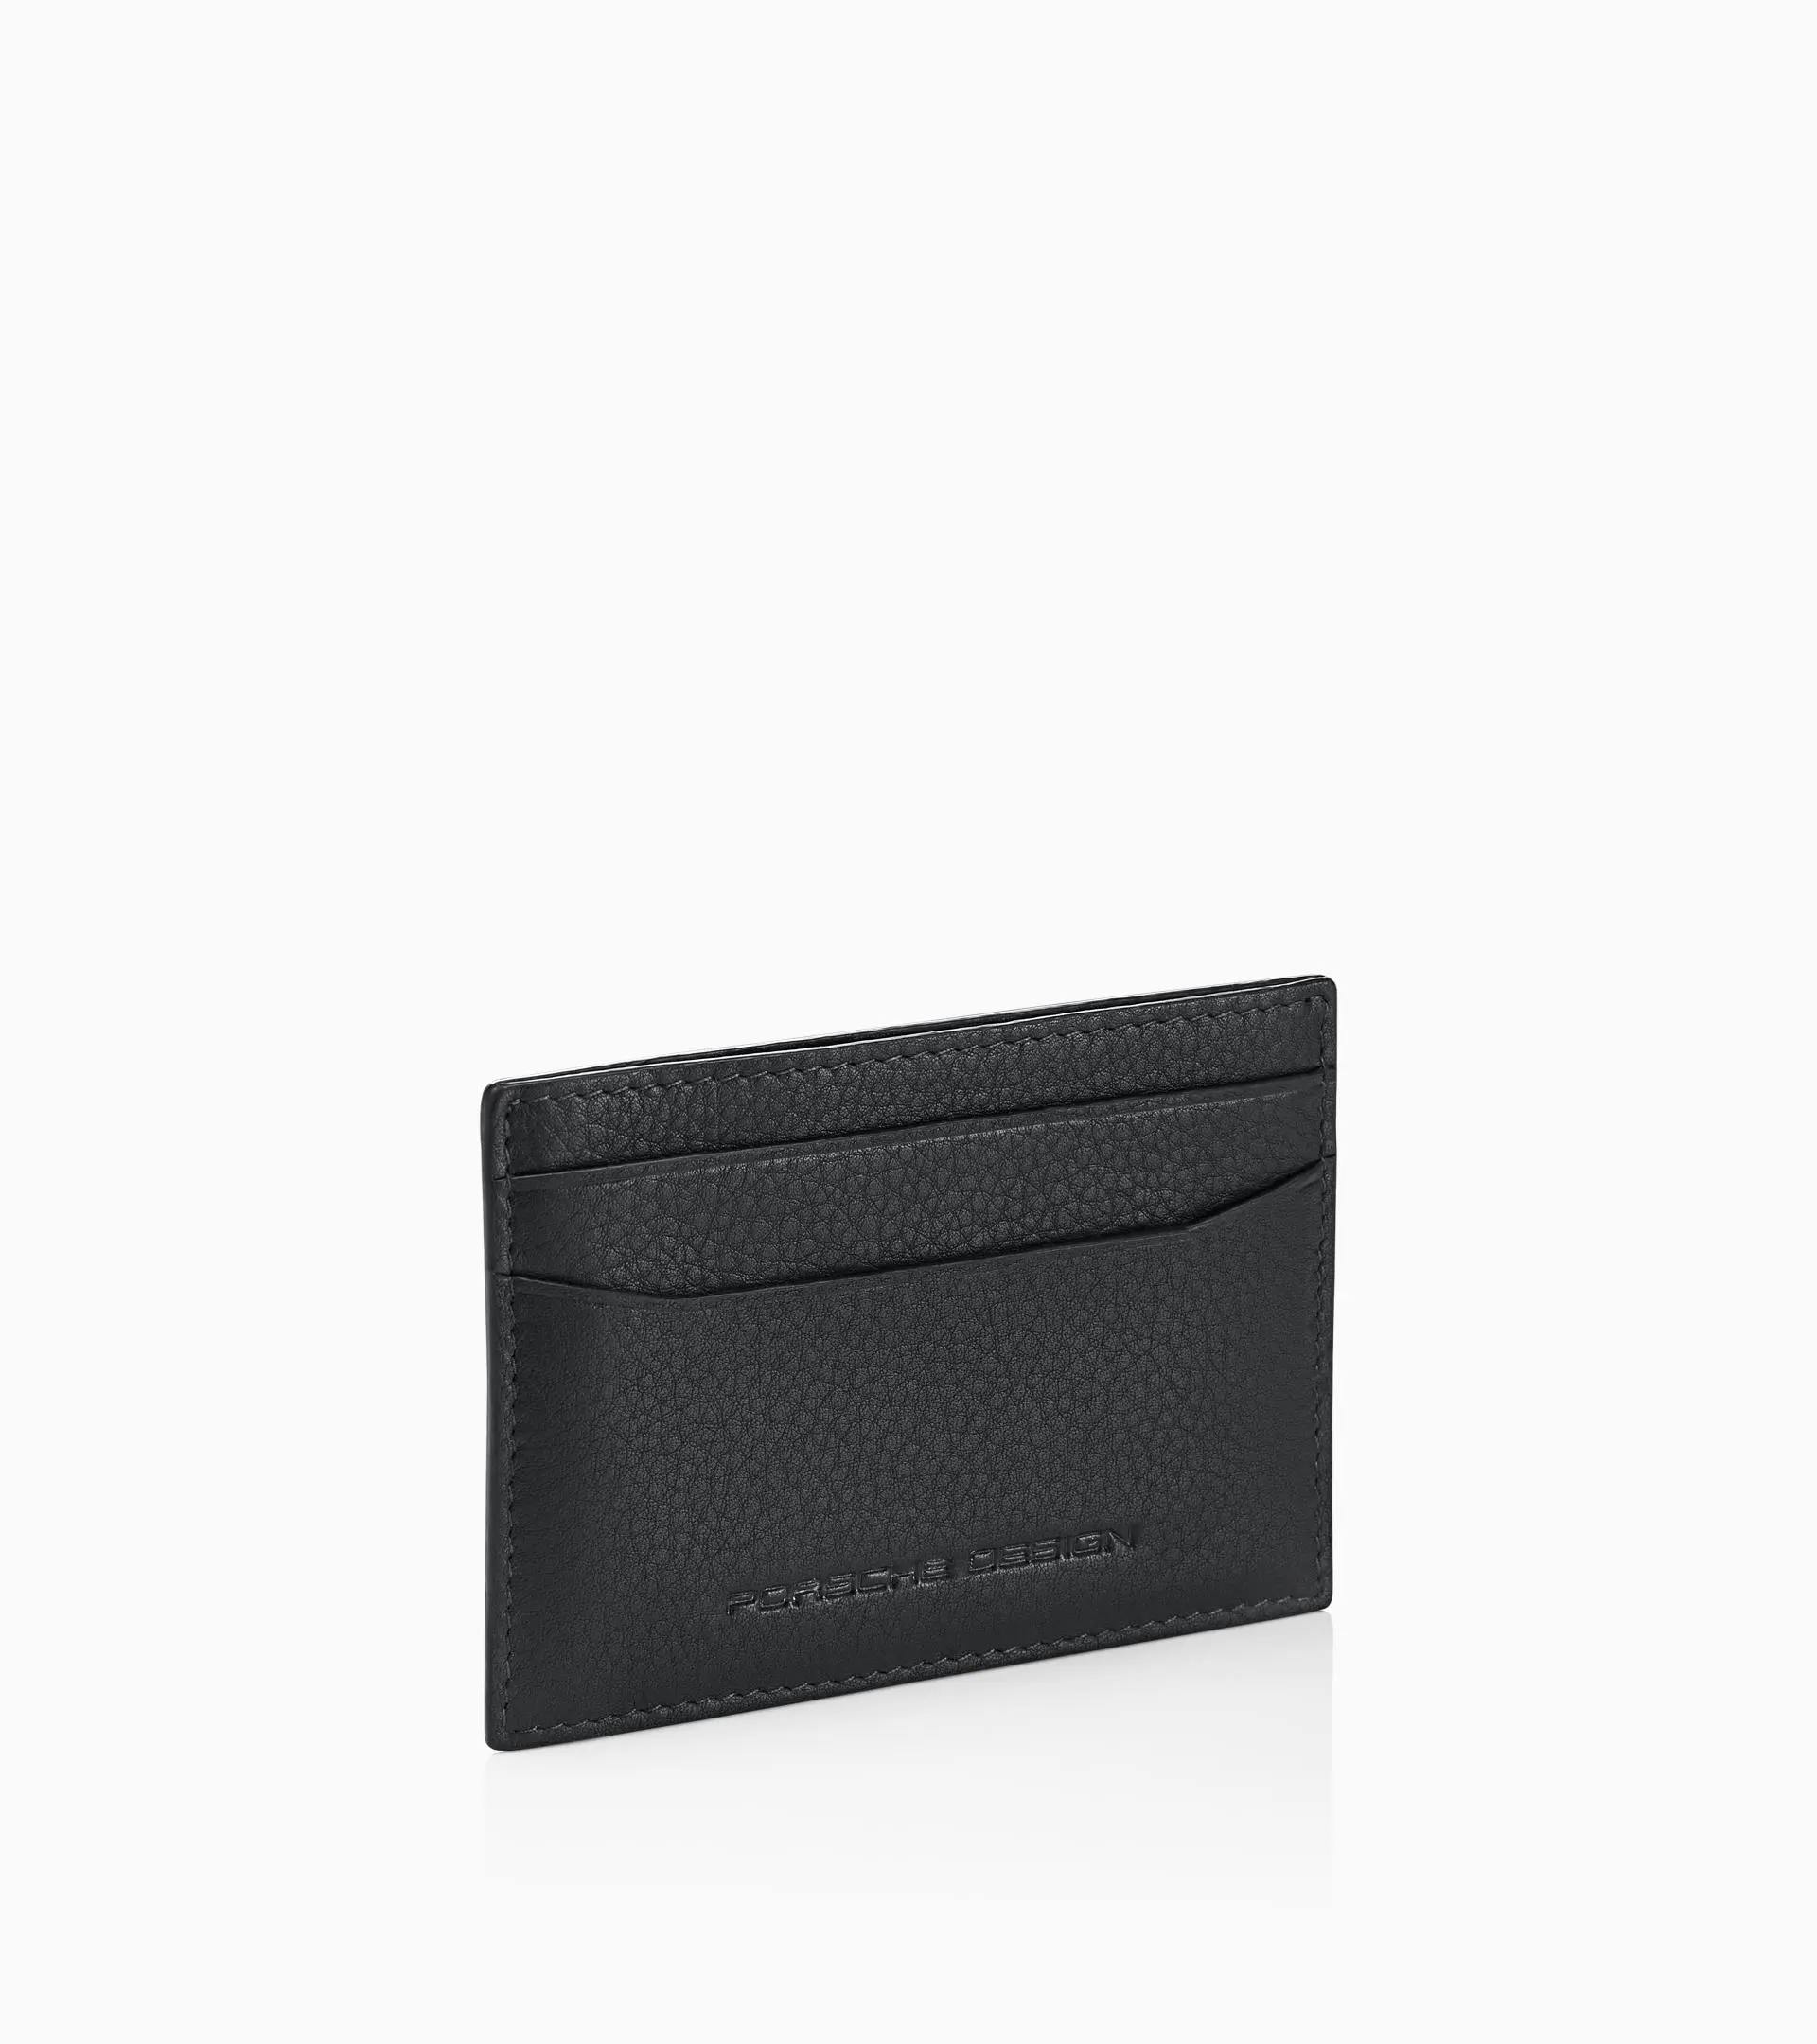 Business Card Holder 2 with Money Clip 1